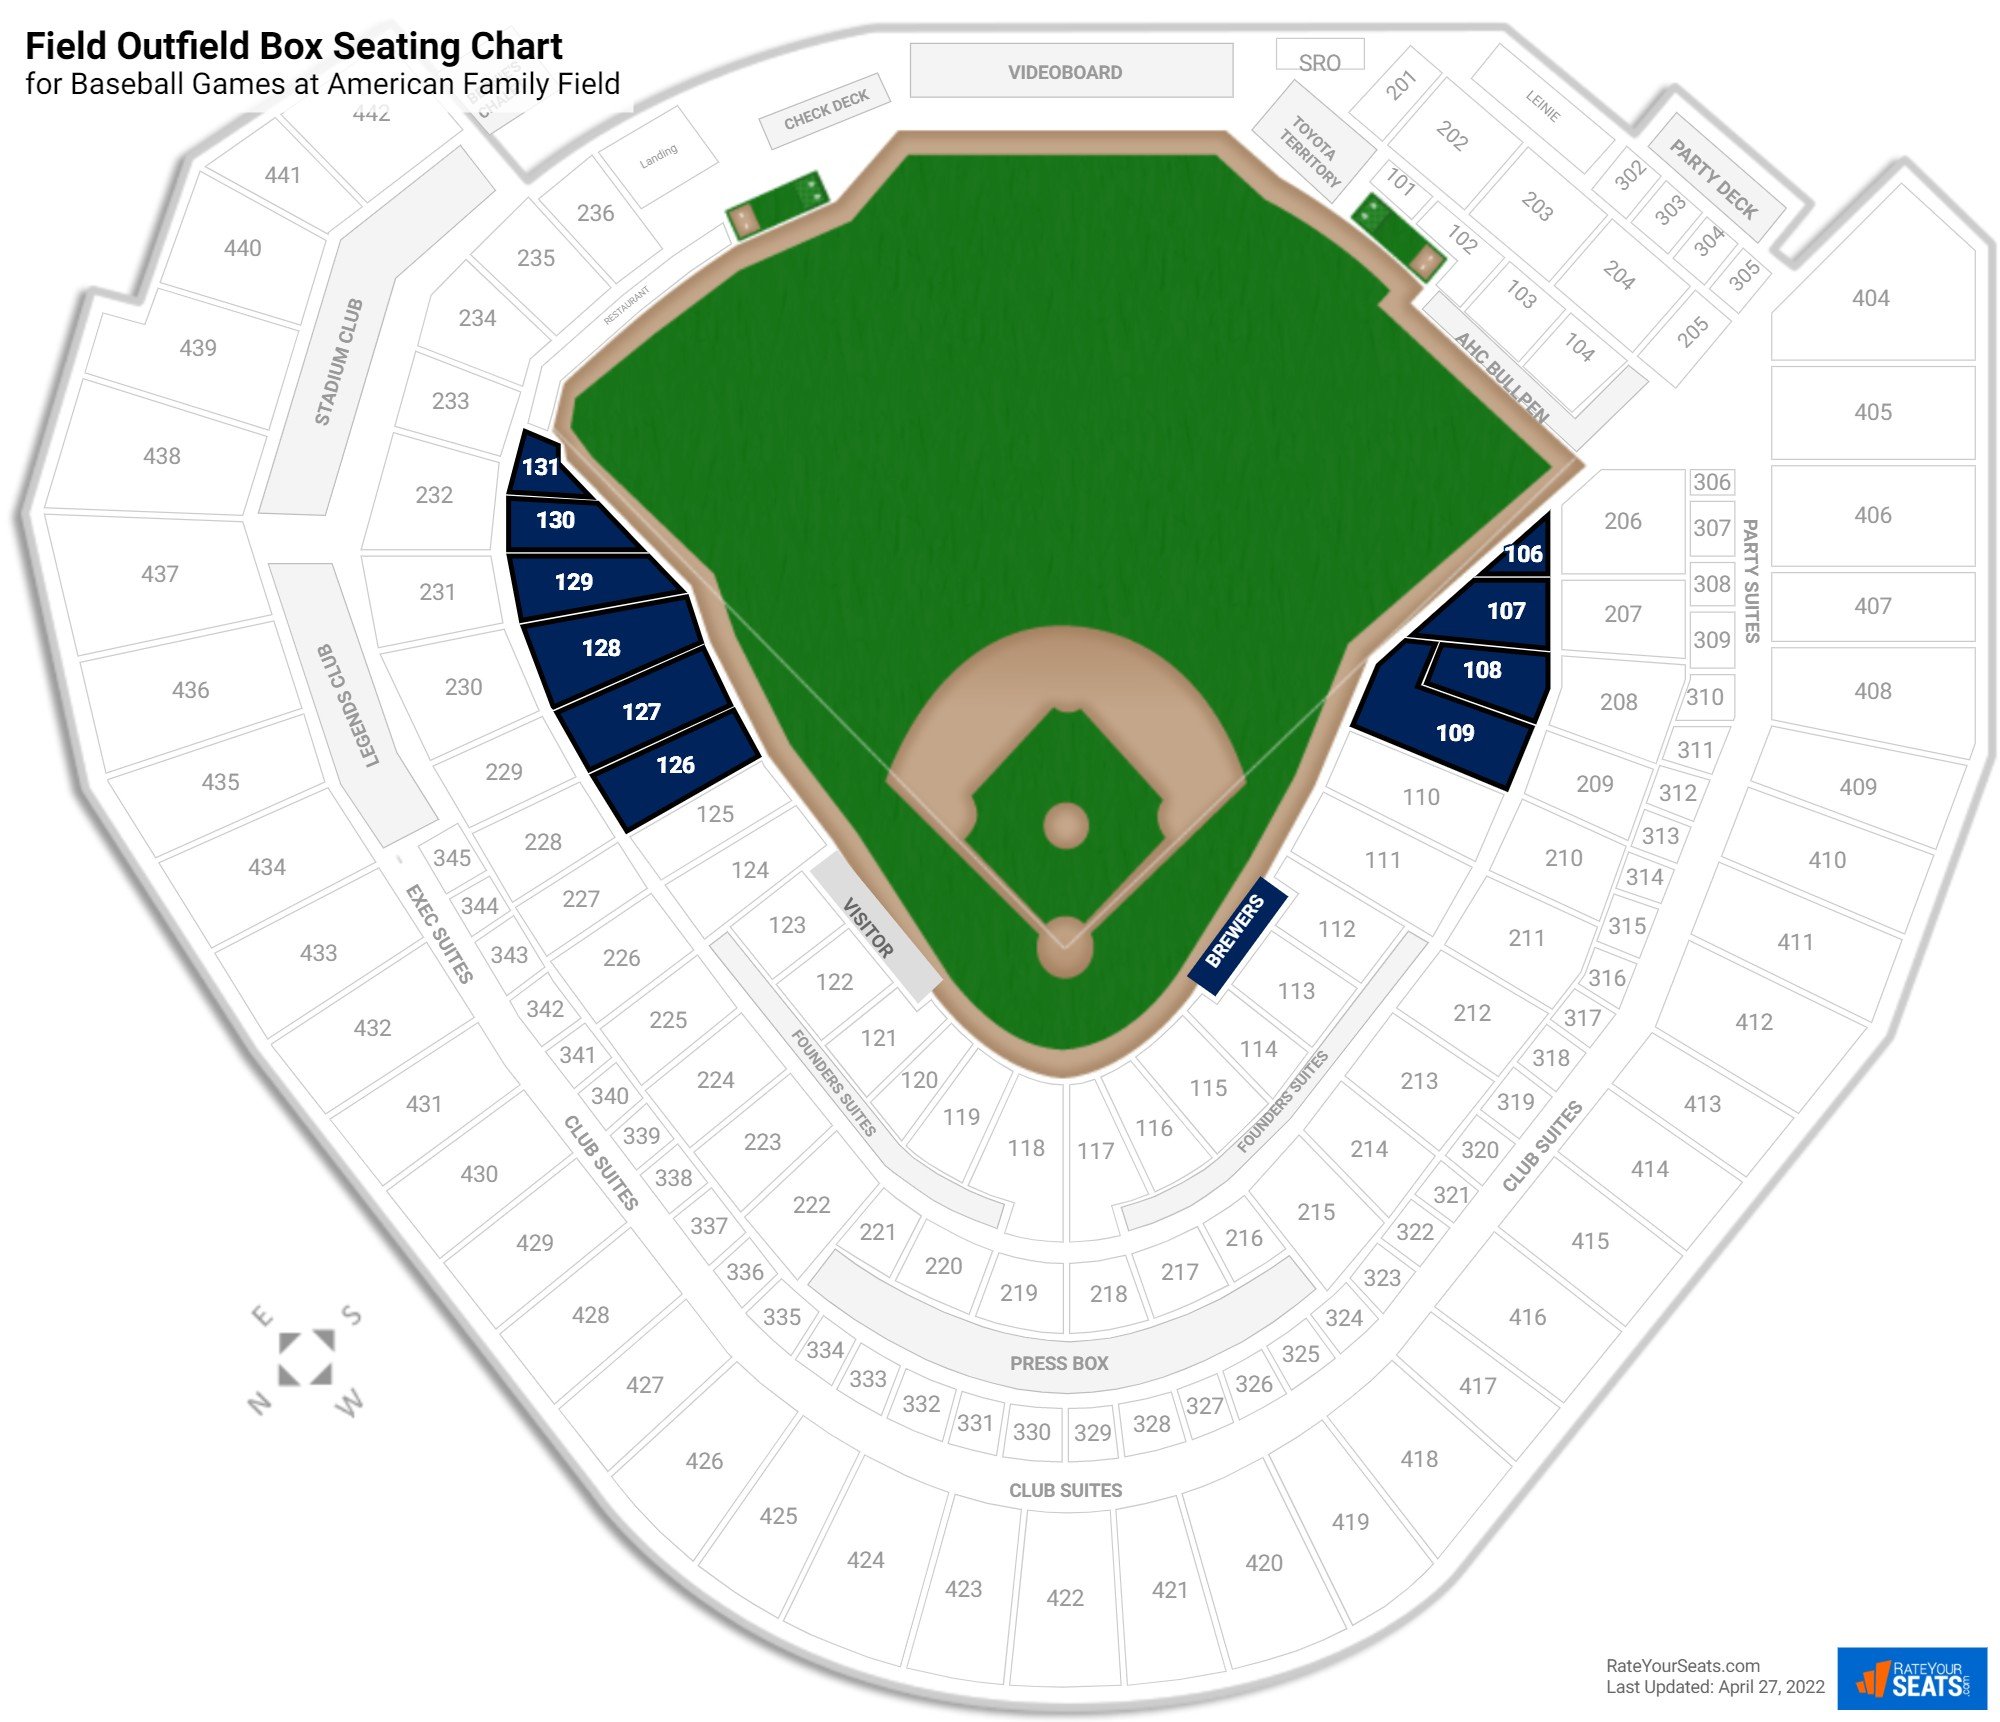 Baseball Field Outfield Box Seating Chart at American Family Field